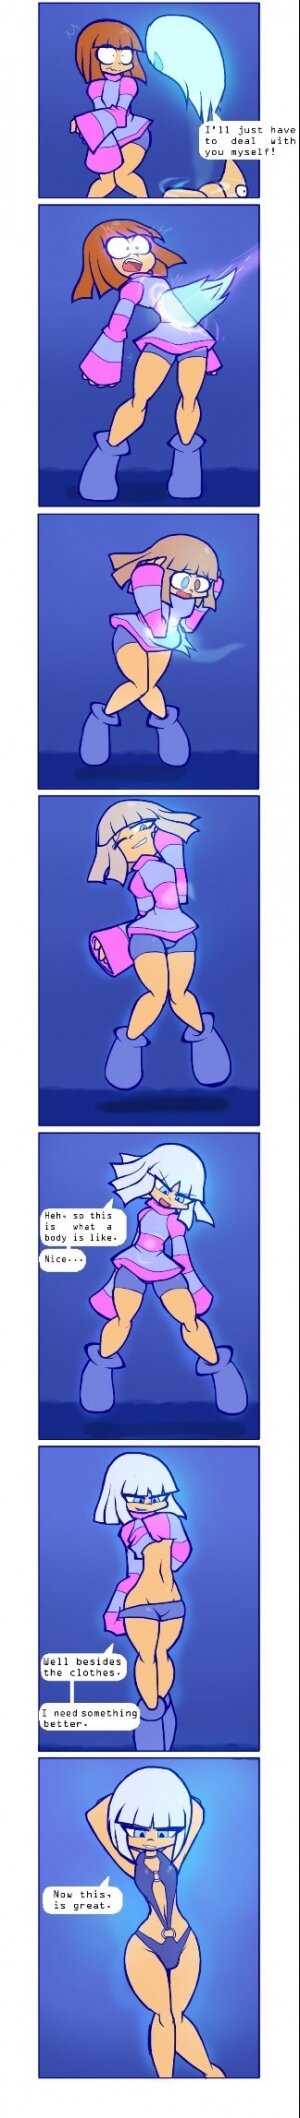 Frisk collection - evenytron - Page 6